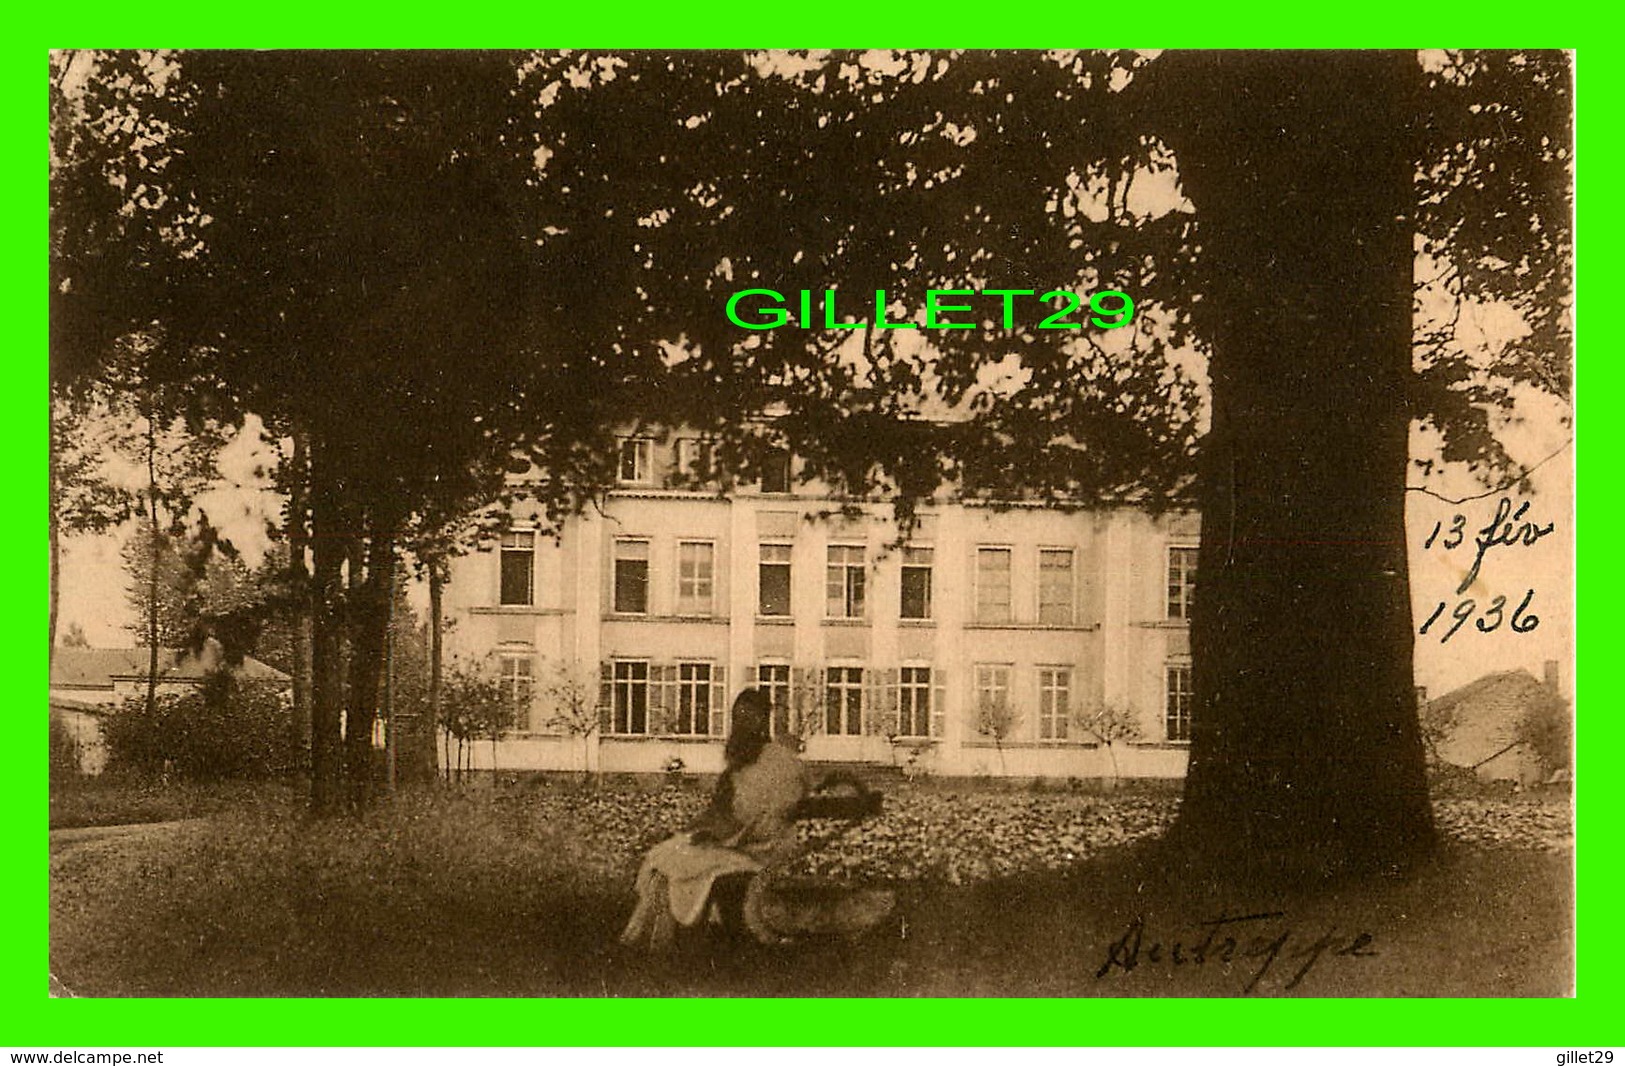 ORMEIGNIES, BELGIQUE - WHITE FATHERS' SEMINARY - THE HOUSE FROM THE NORTH - CIRCULÉE EN 1936 - ANIMÉE - - Ath